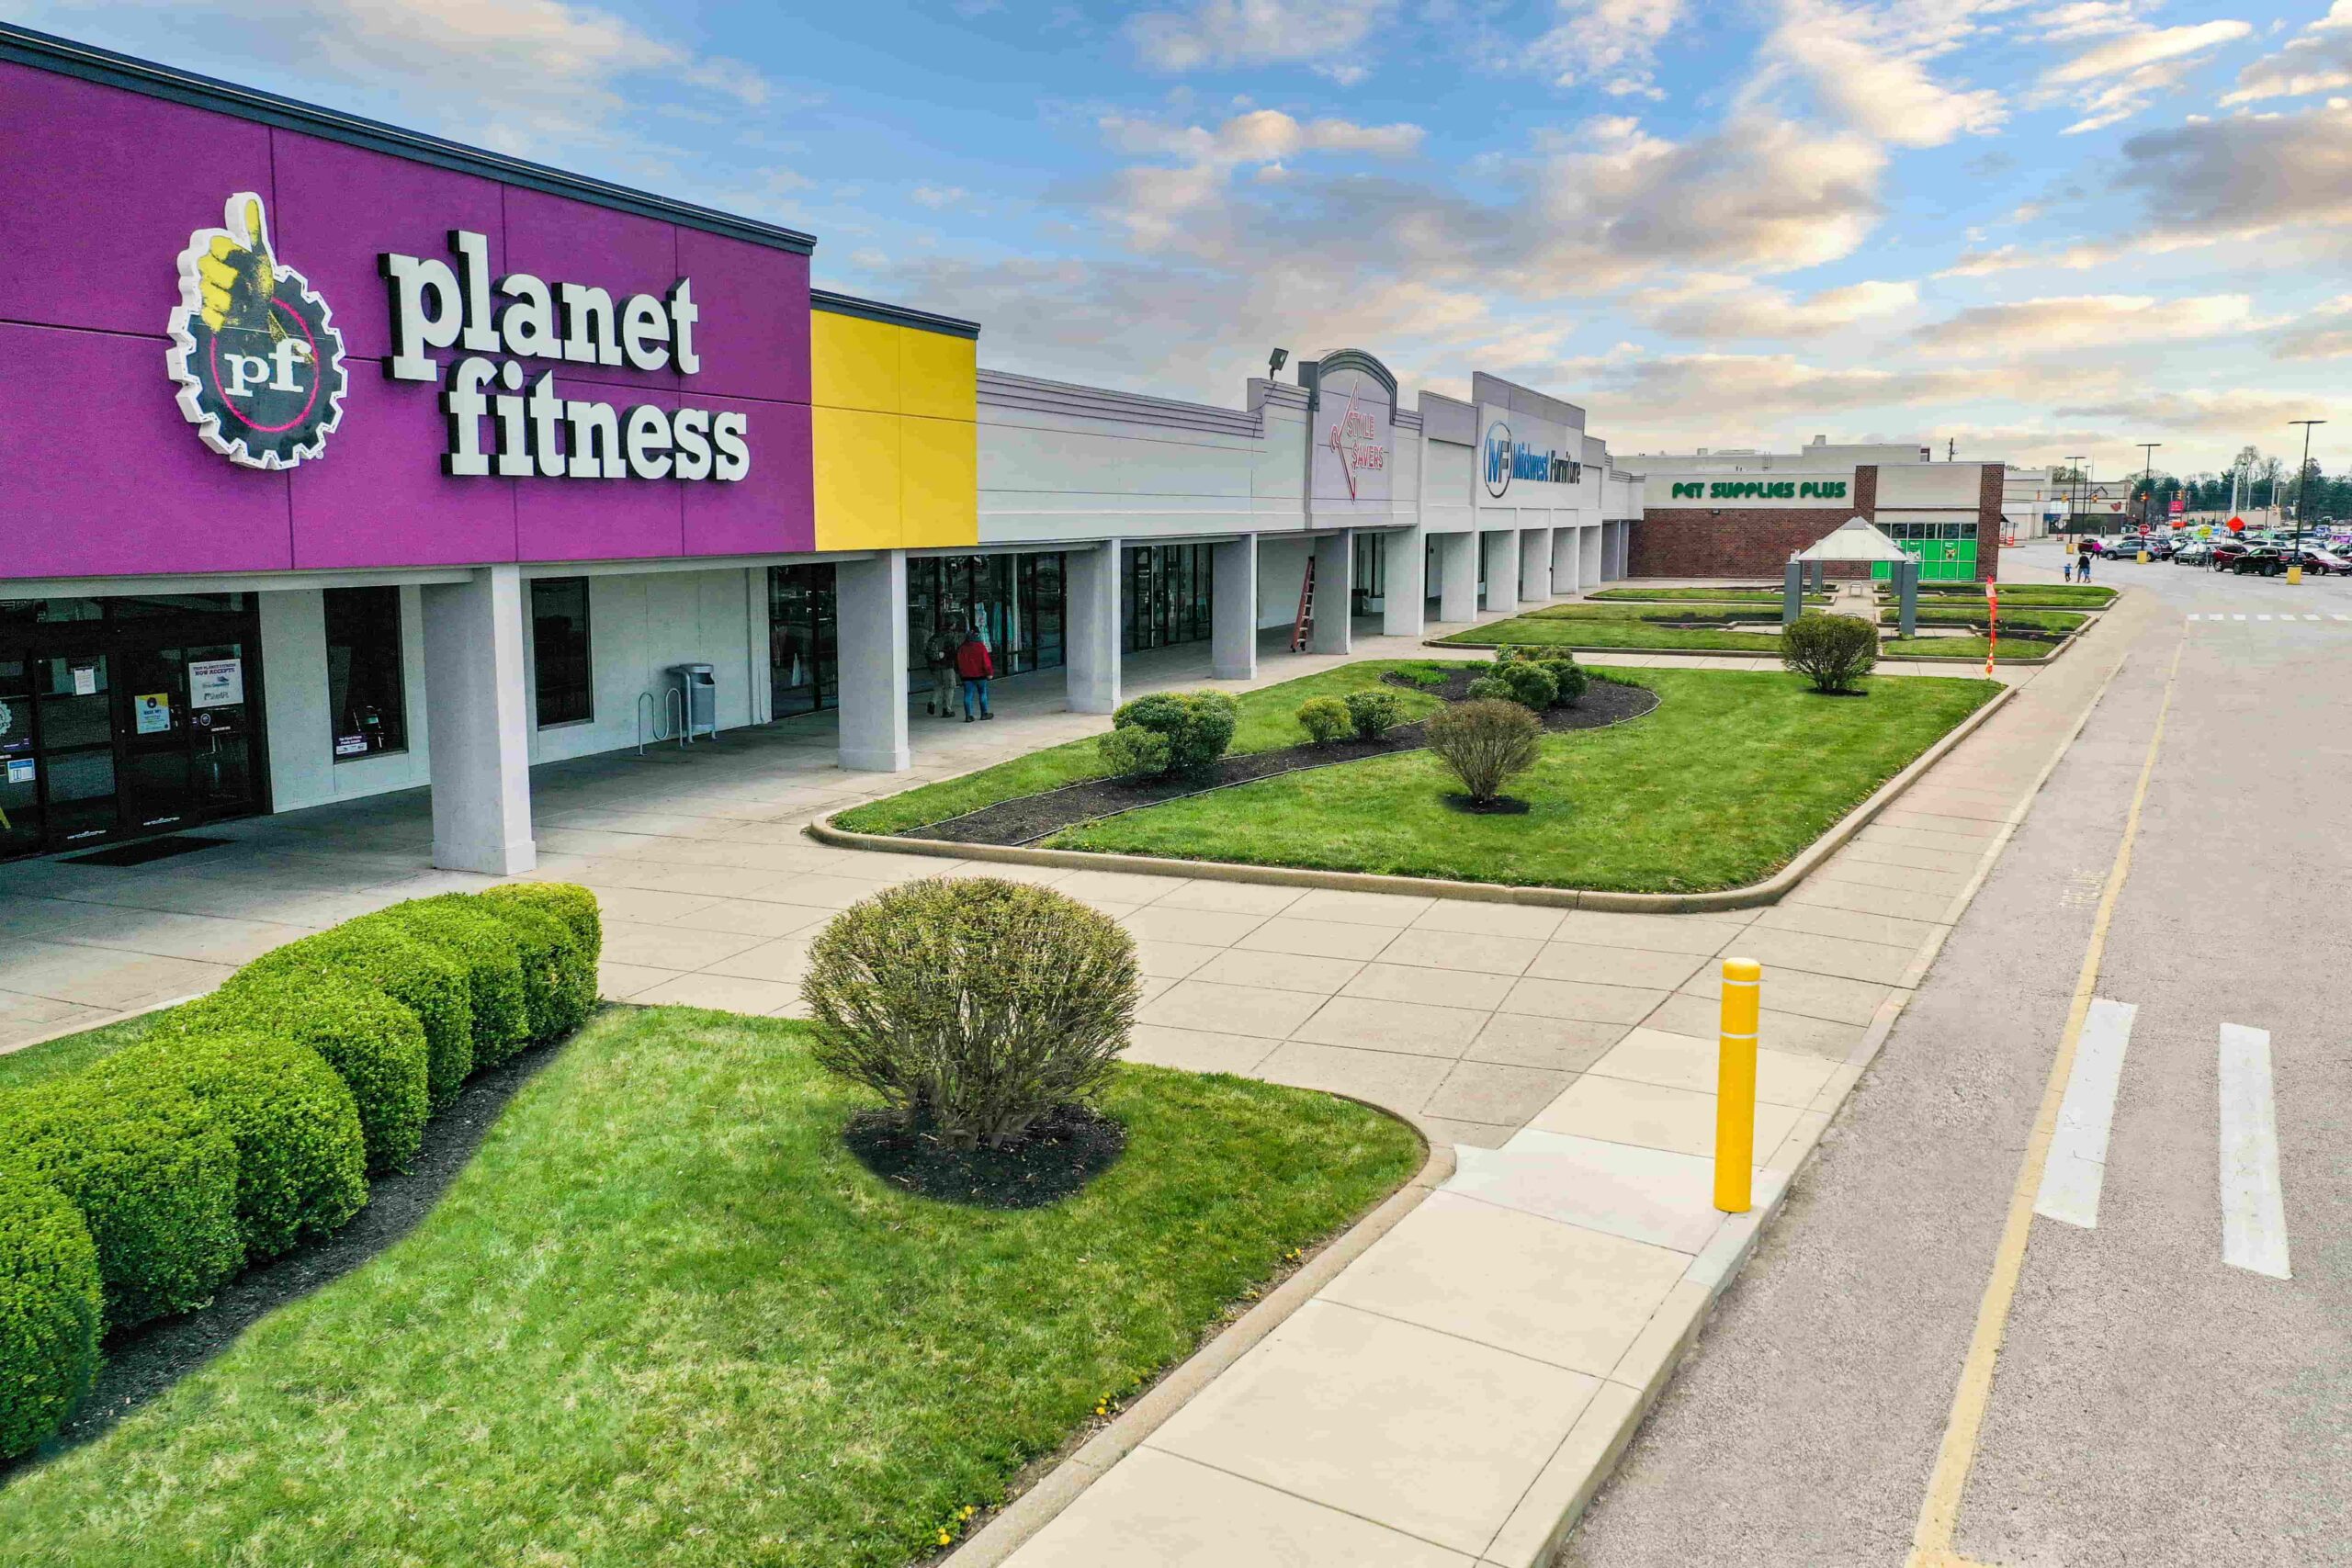 2 - Retail Oriented (Focus On Planet Fitness)-min